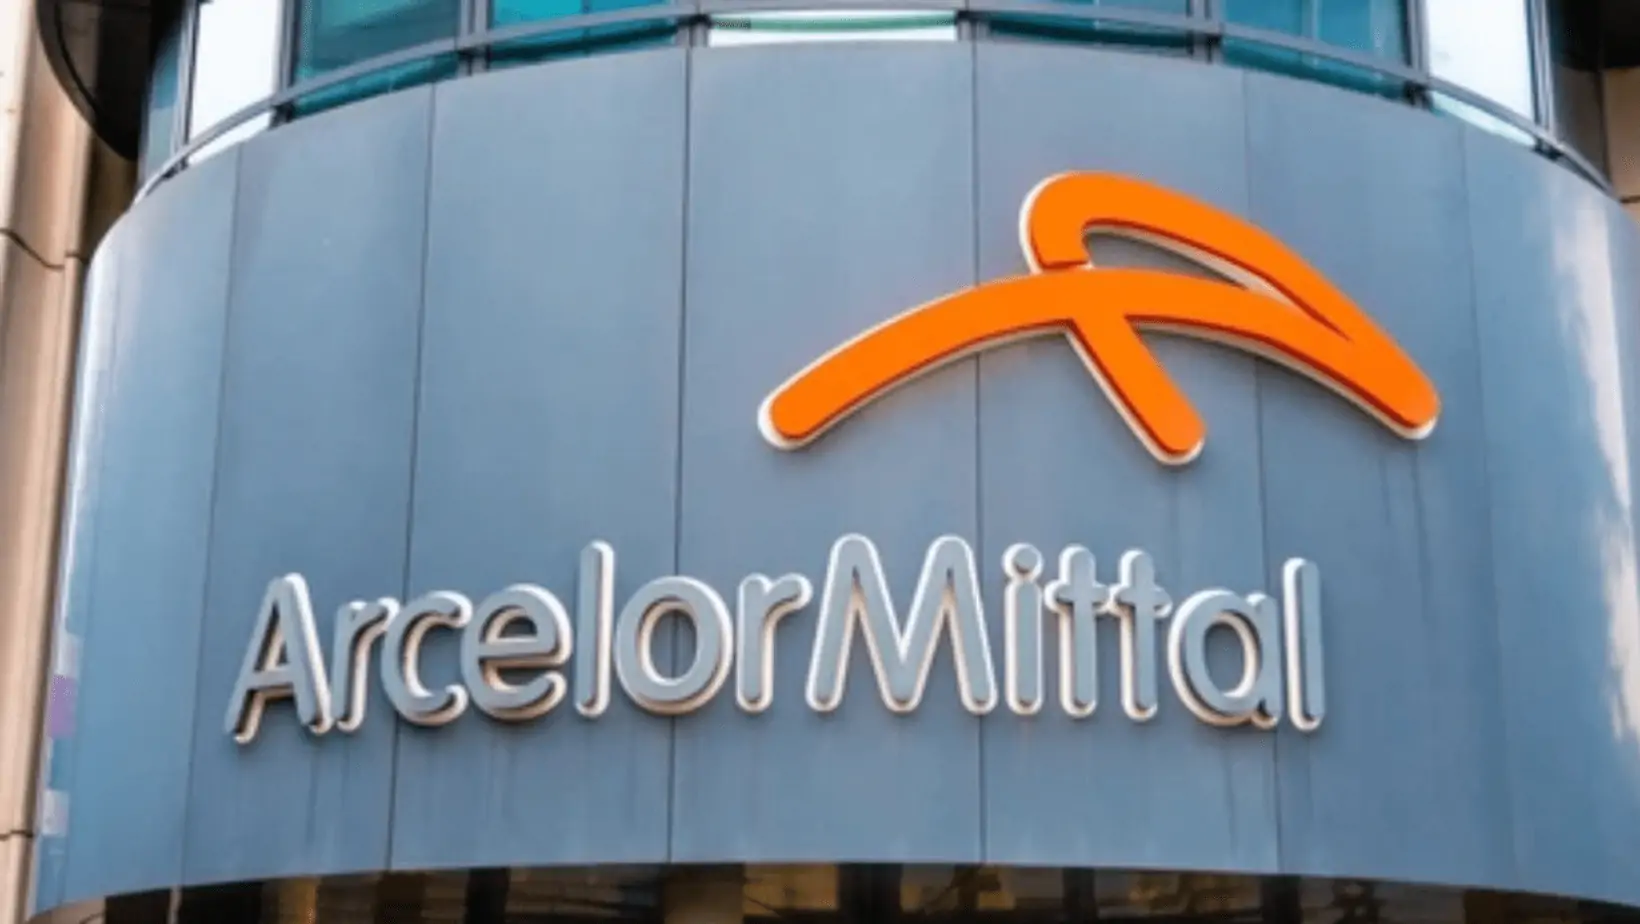 ArcelorMittal South Africa Reports Significant Losses, Considers Closure of Longs Business